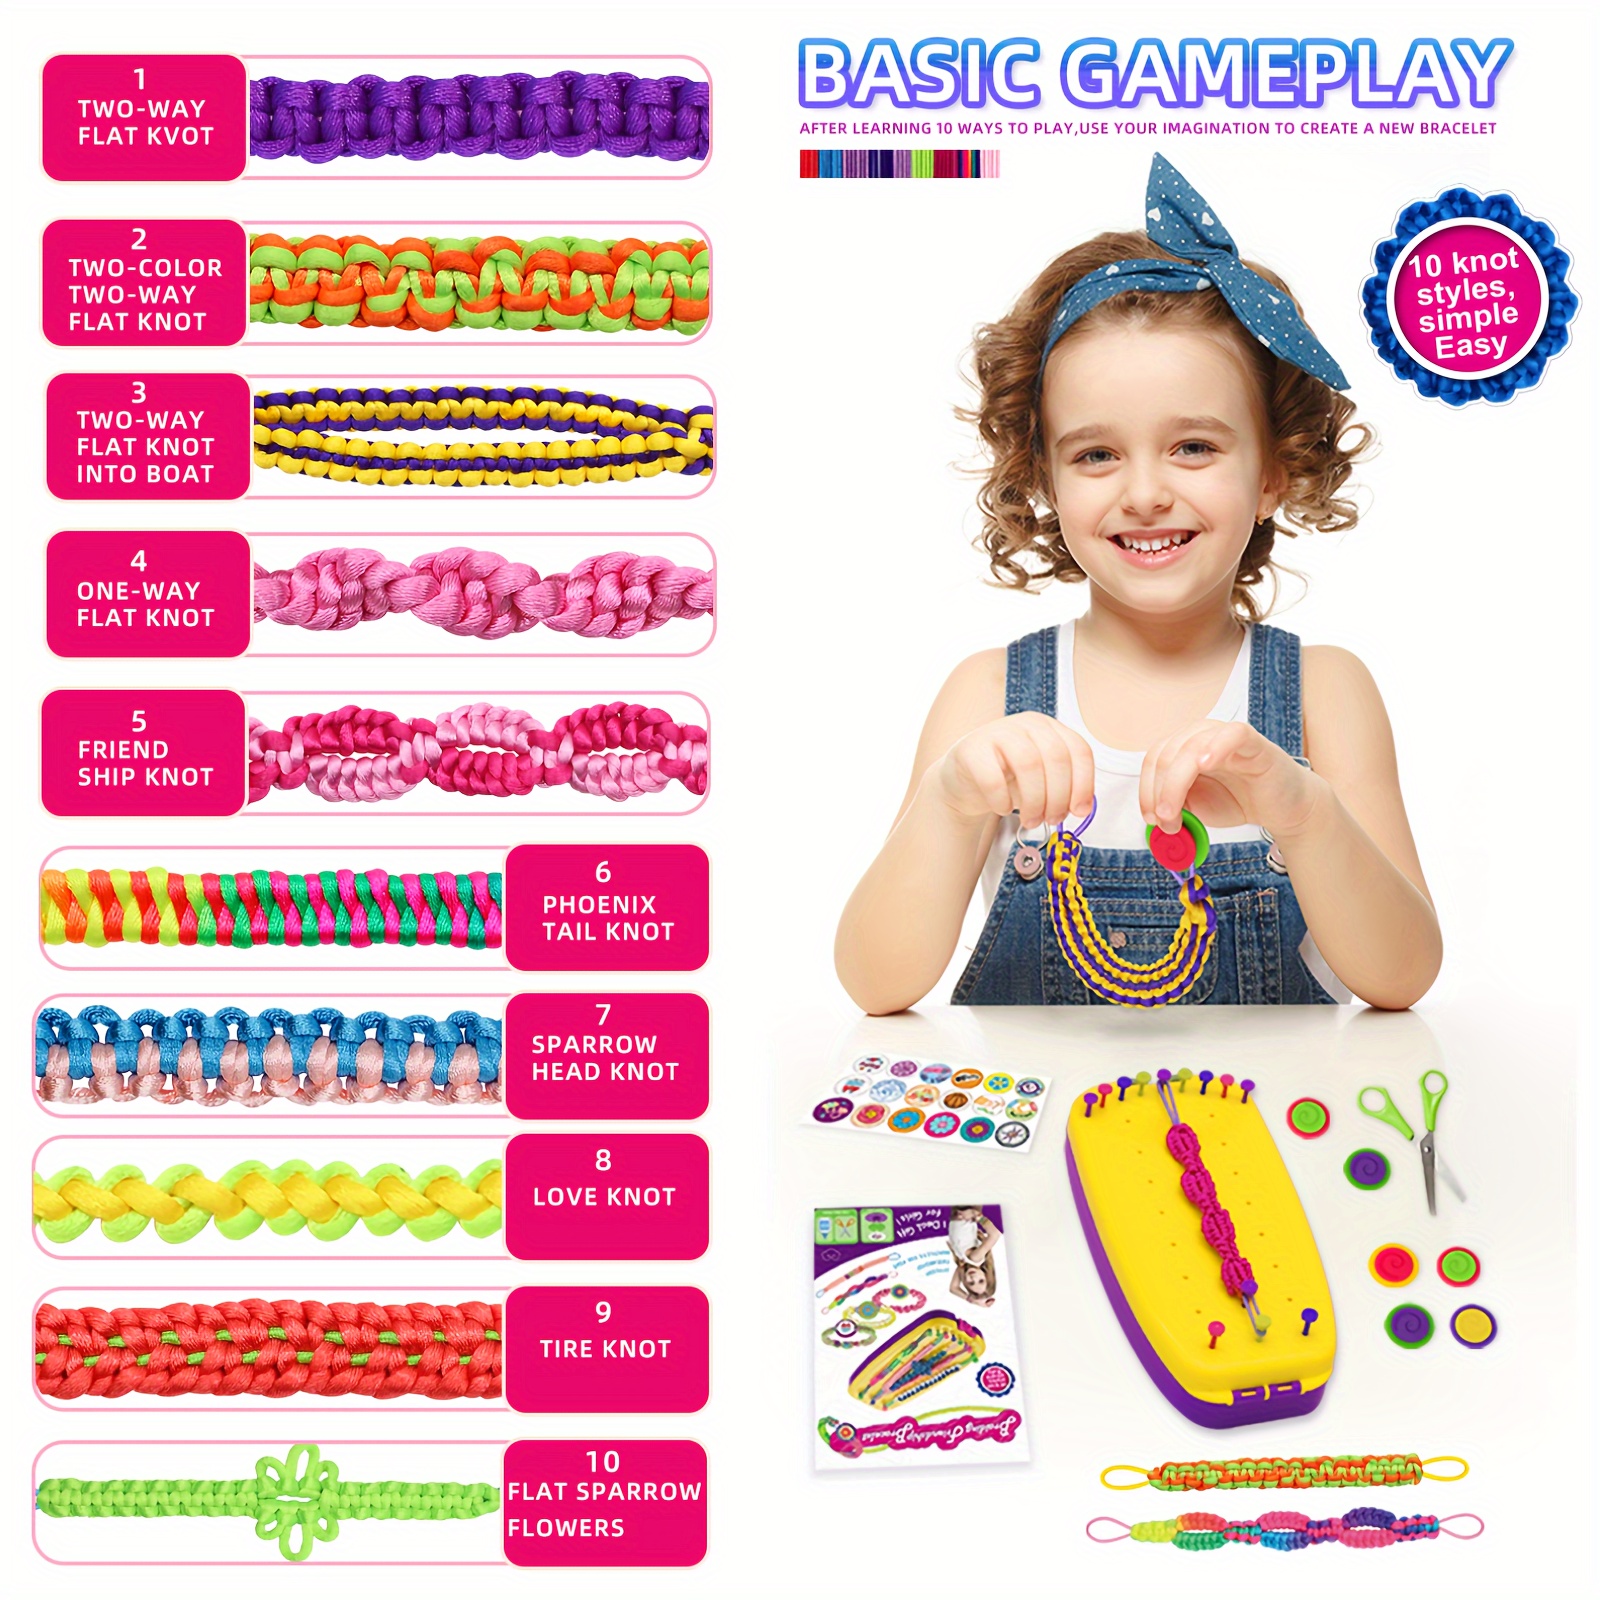 Cool DIY Craft Kits Toys for 6 7 8 9 10 11 12 Years Old Girls, Friendship Bracelet Making Kit, Bracelet String and Travel Activities, Birthday Gifts